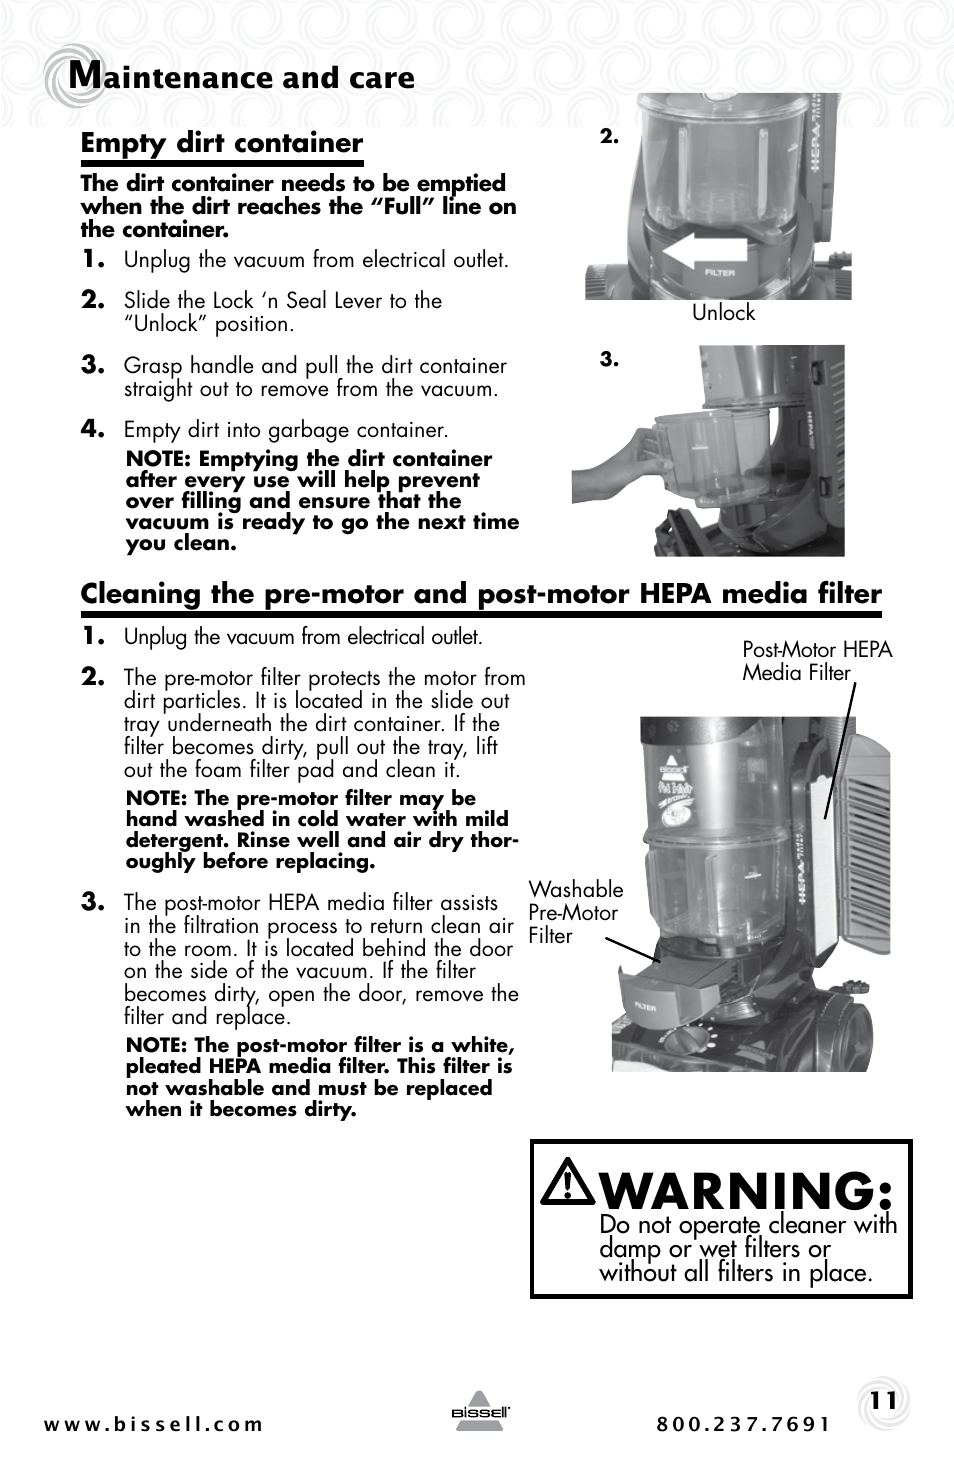 Warning, Aintenance and care, Empty dirt container | Bissell PET HAIR ERASER 3920 User Manual | Page 11 / 20